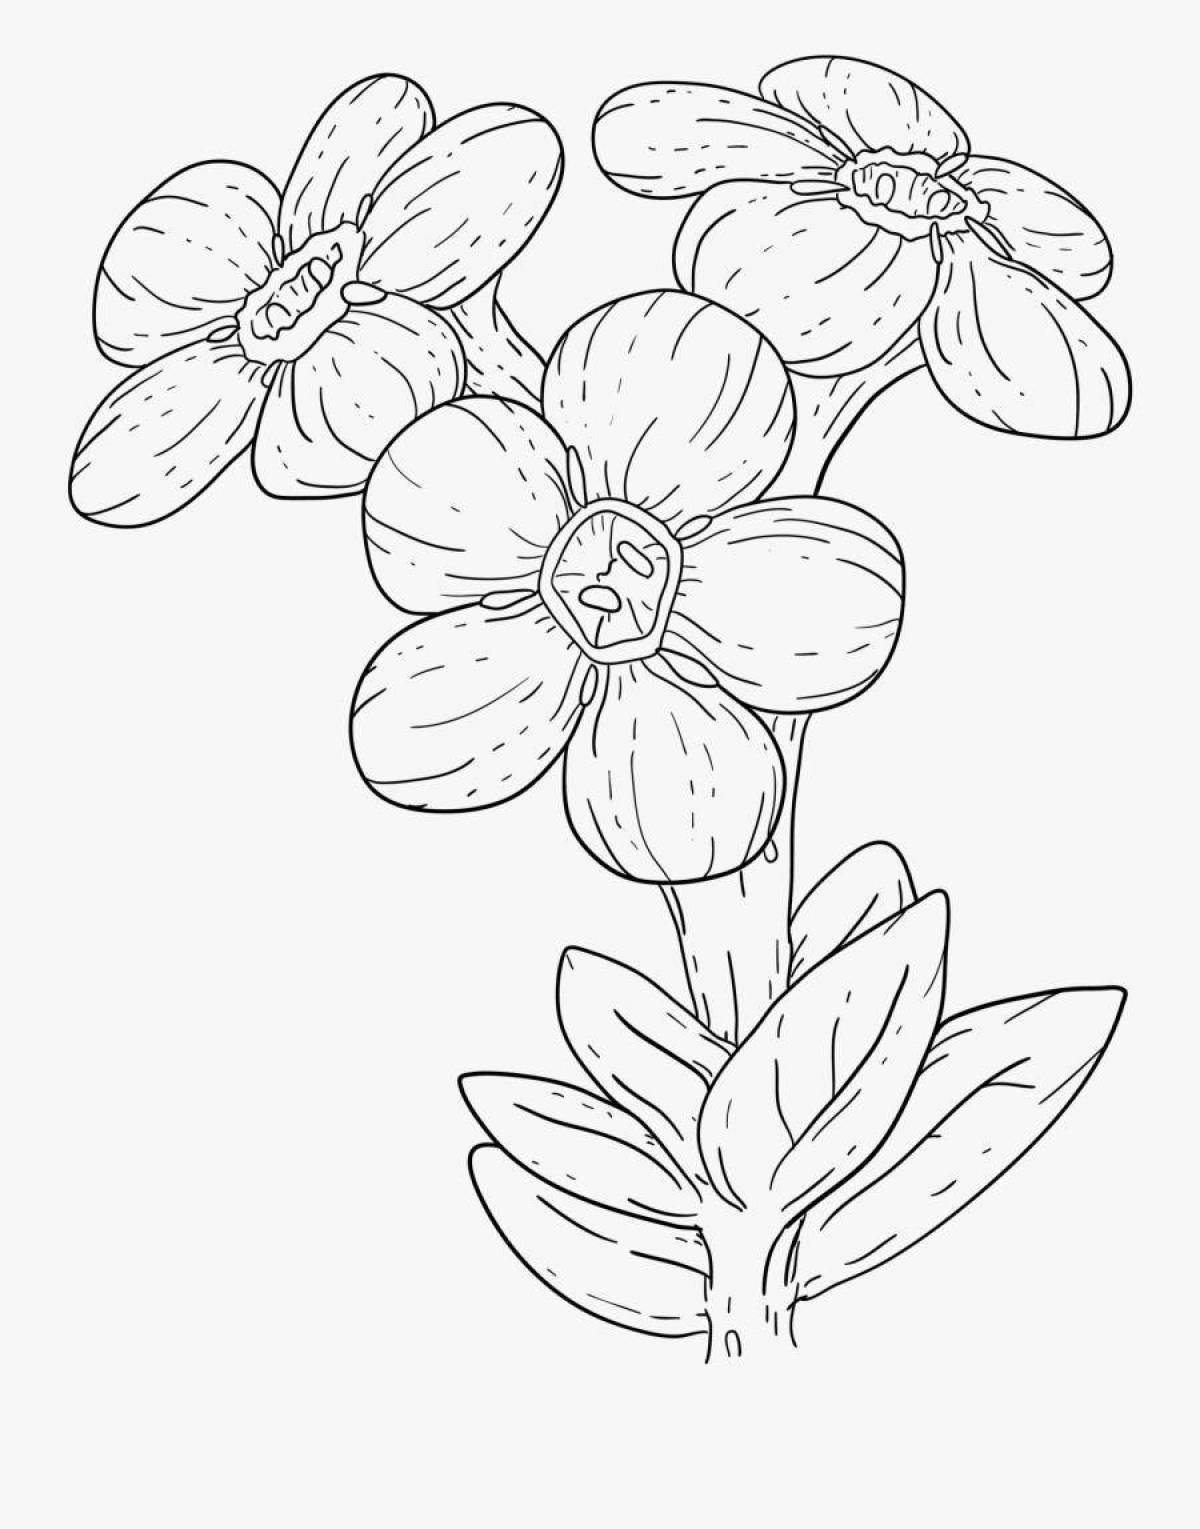 Coloring book exquisite forget-me-not flower